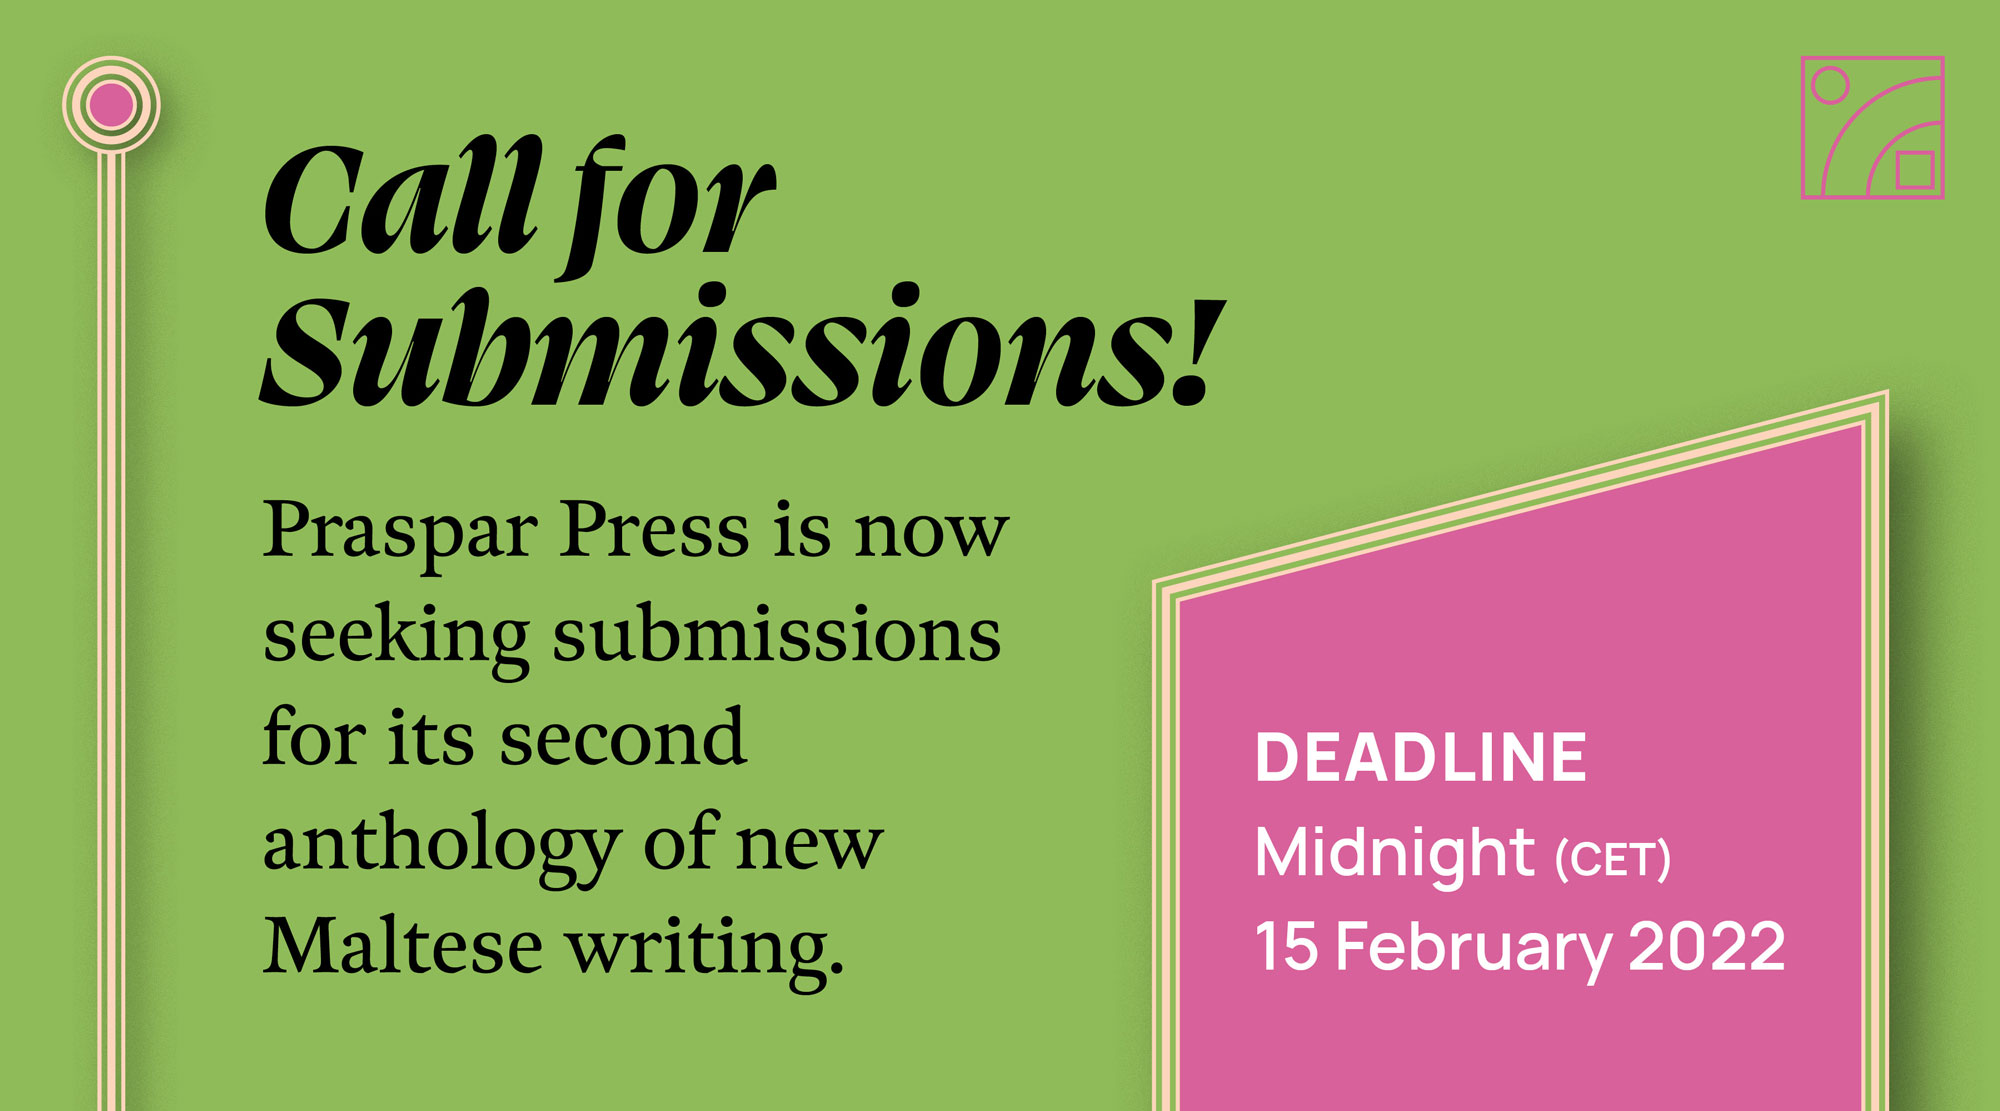 Praspar Press is now seeking submissions from Maltese writers and translators of Maltese literature for its second anthology of new Maltese writing.  We are looking for work translated into English from Maltese accompanied by the original Maltese text, and work originally written in English.  Submit ONE of the following: Poetry: Up to two poems of any length. Short Fiction: One story up to 3,000 words. Novel Extract: One extract up to 3,000 words. Literary Non-Fiction: one essay or one extract from a longer work up to 3,000 words.  Any multiple submissions or submissions over the set length will unfortunately not be read.  How to submit: Email your submission along with a short bio note in a Word document to submit@praspar.com  Deadline: Midnight (CET), 15 February 2022.  A note on ‘Maltese writing’: You might be Maltese and based in Malta; have Maltese heritage and live elsewhere; or have been based in Malta for a length of time and consider yourself part of Maltese life and culture. Feel free to get in touch if you are unsure whether this opportunity is right for you.